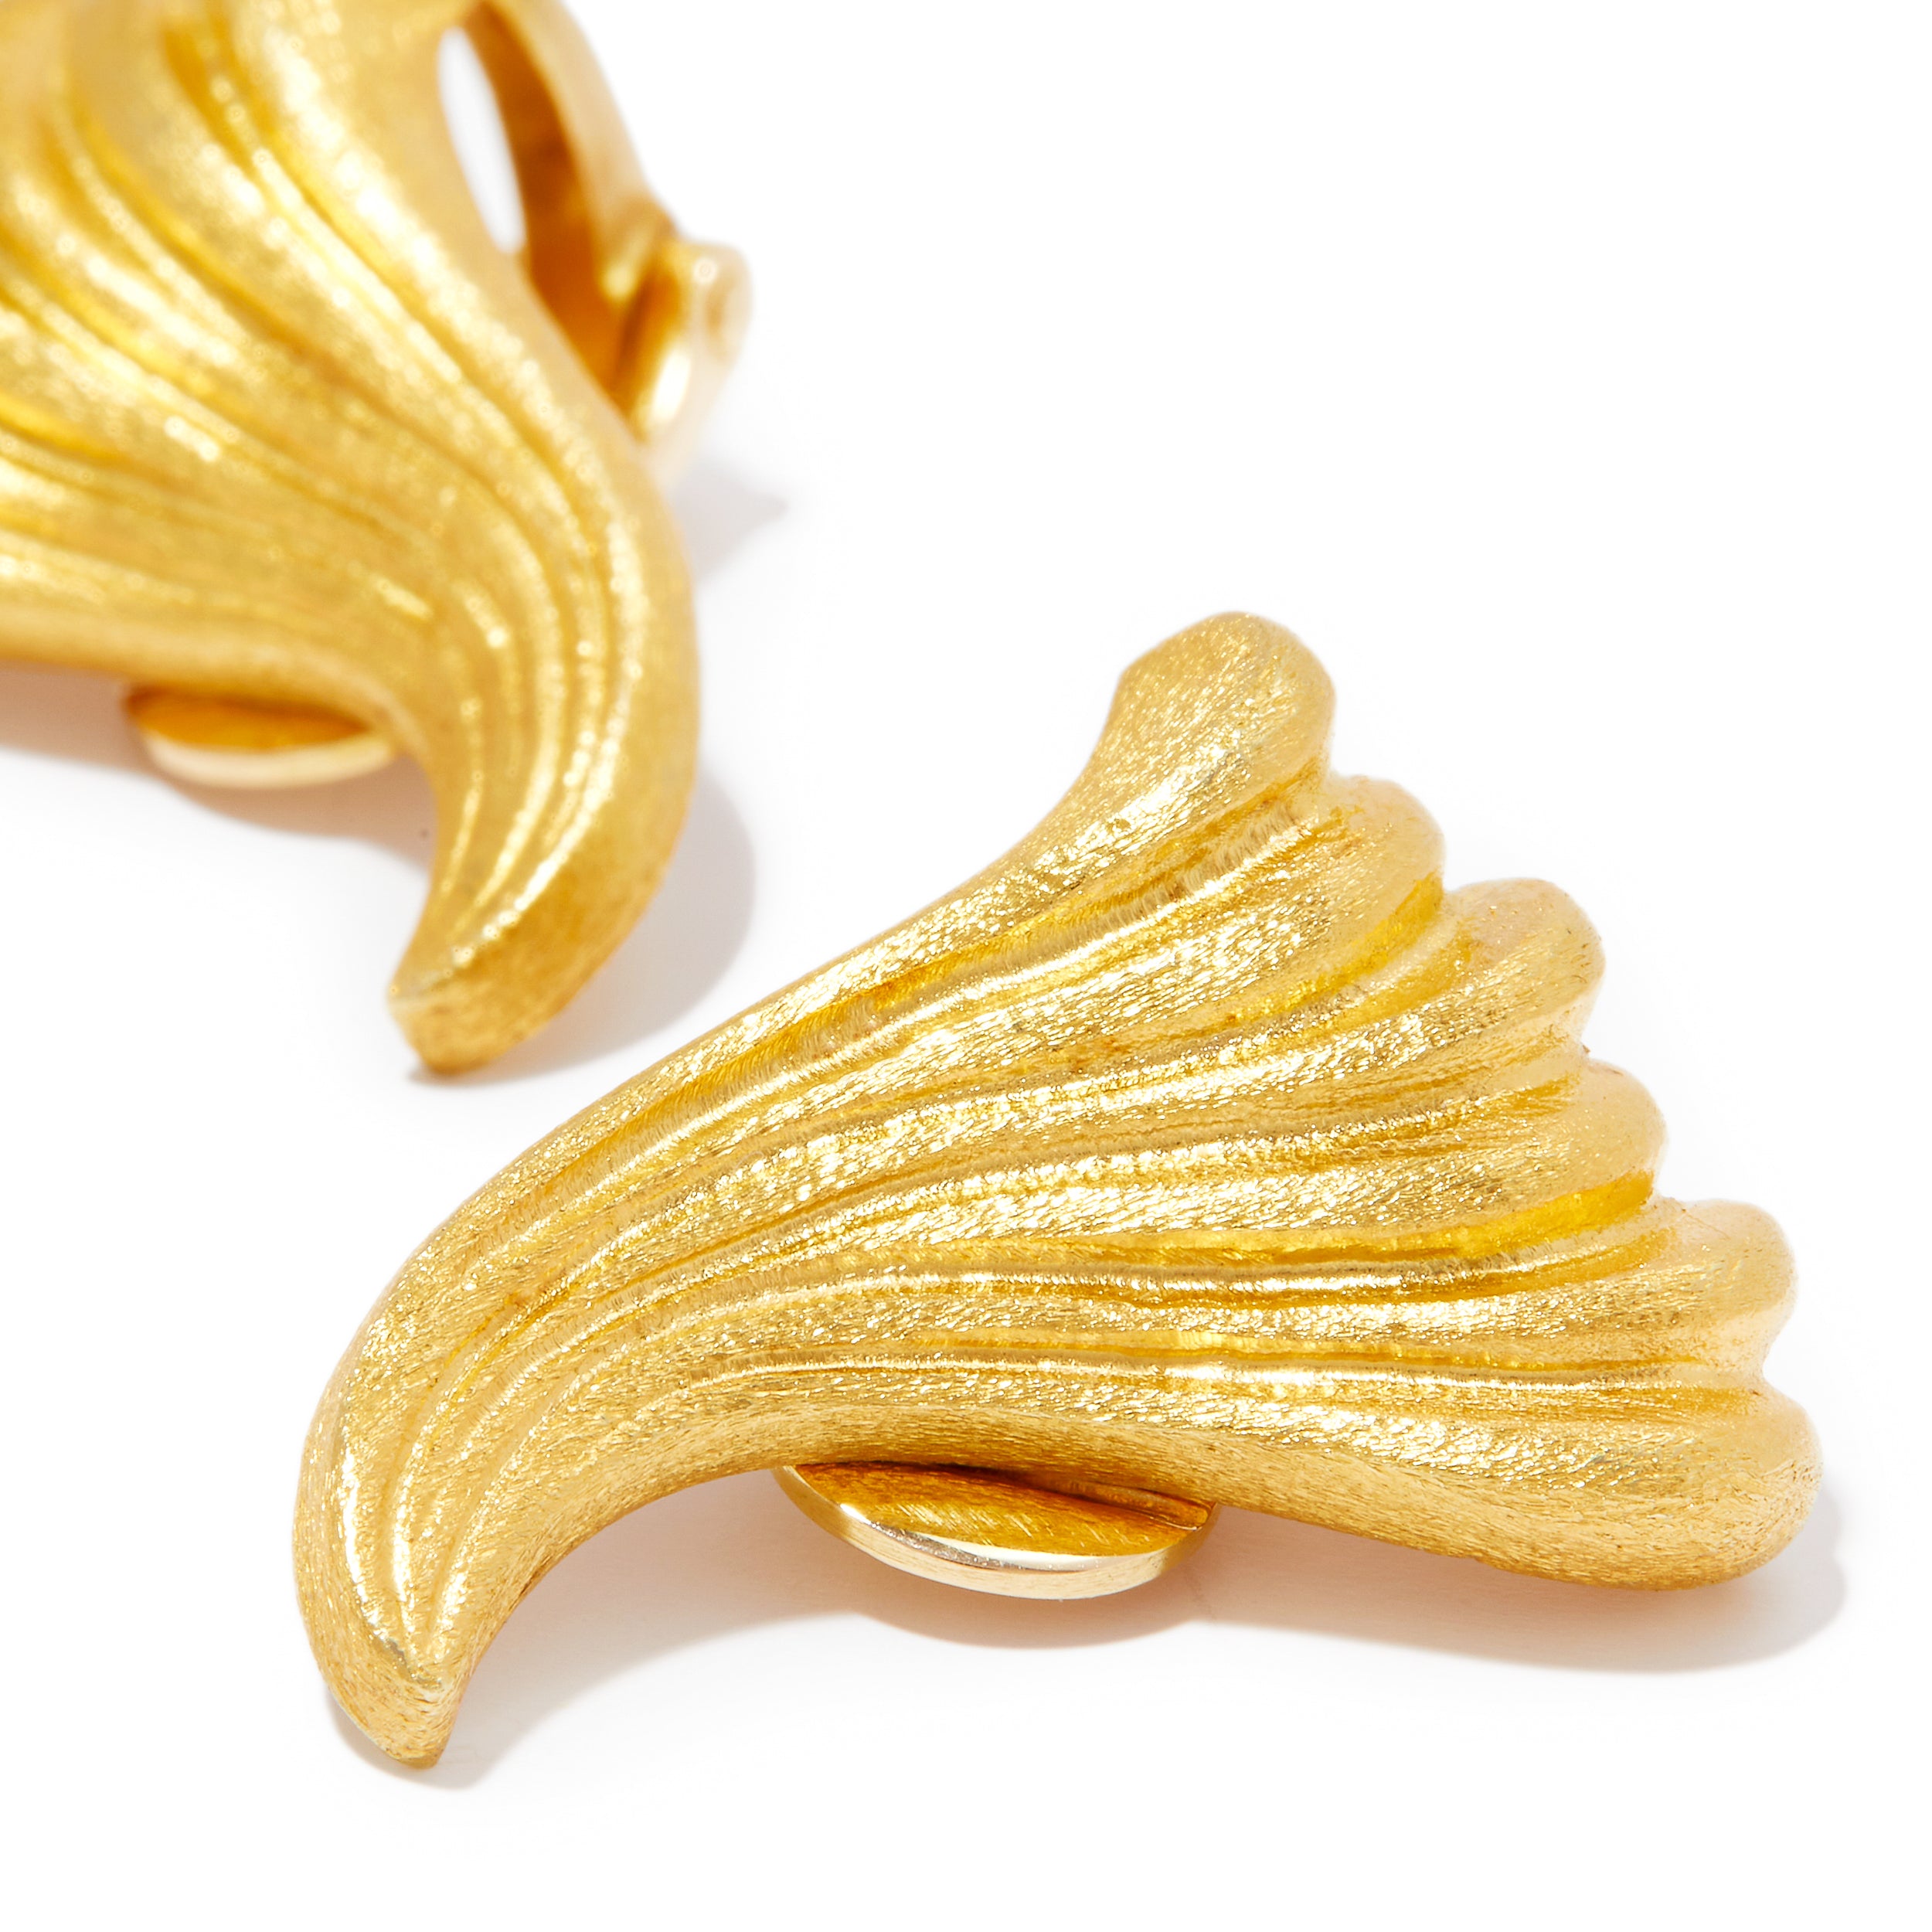 980s Maramenos & Pateras 18ct gold earrings in a wave design.